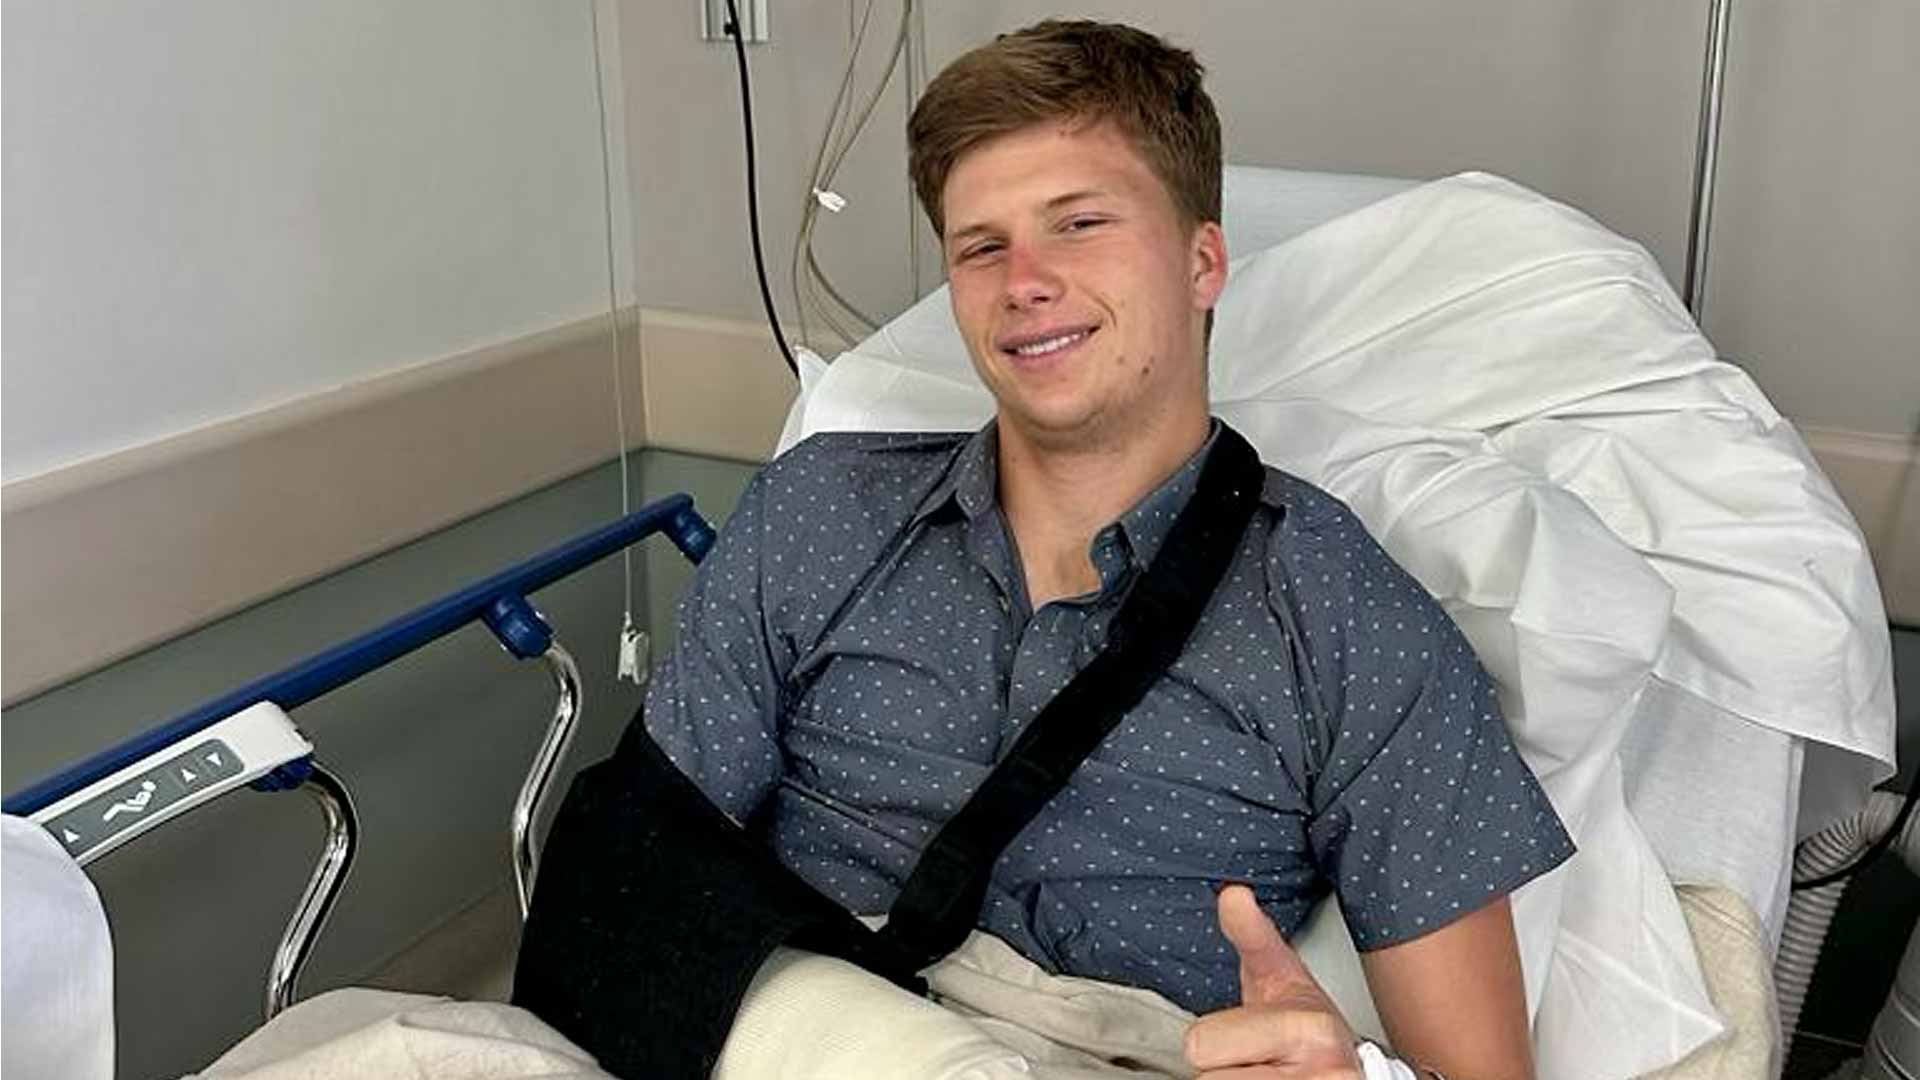 Jenson Brooksby undergoes successful right wrist surgery, performed by Dr. Steven Shin.